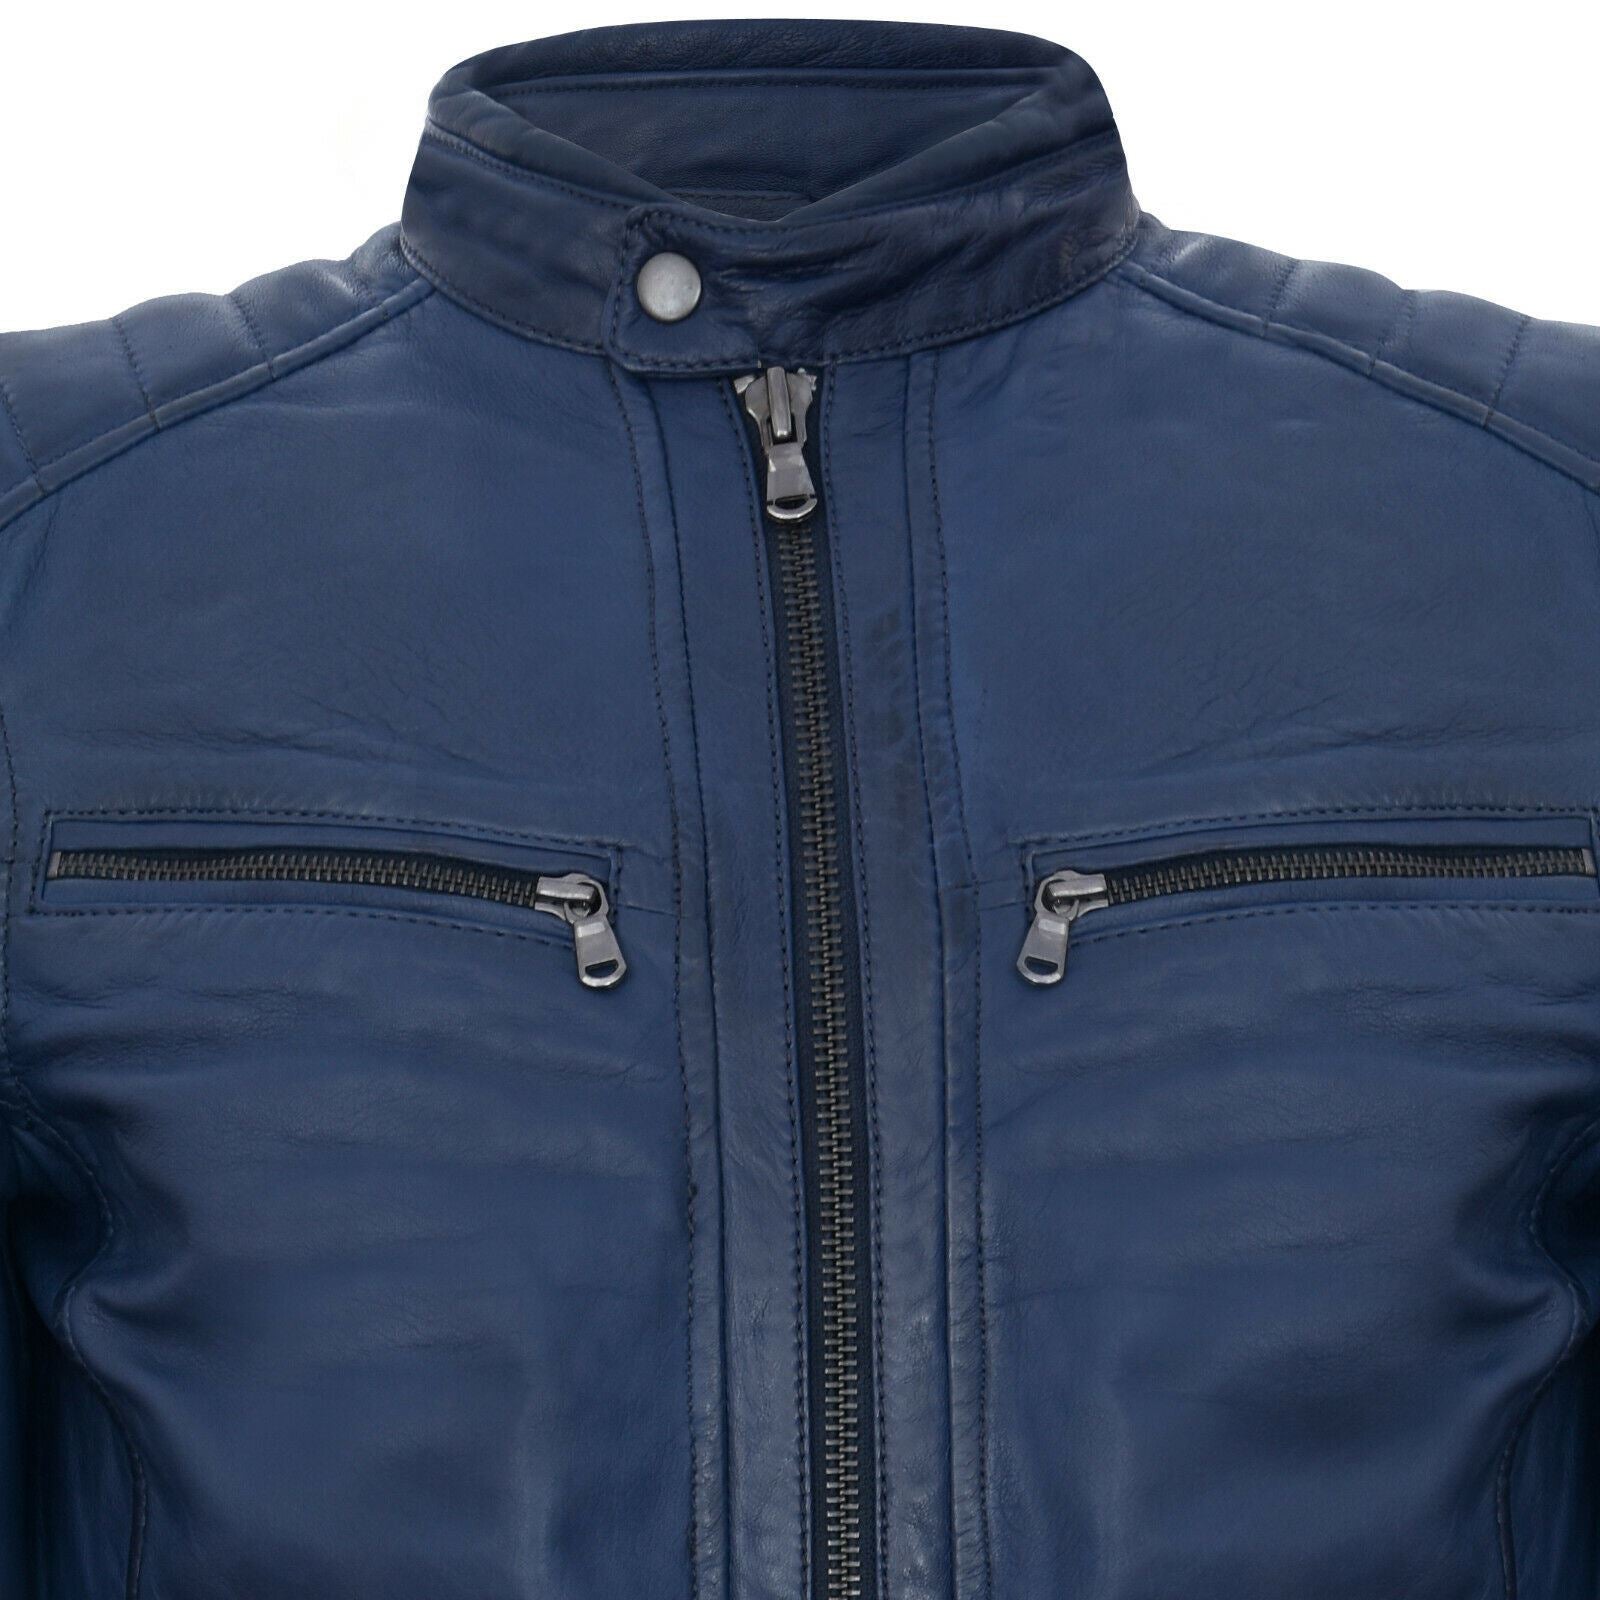 Mens Leather Jacket Vintage Quilted Retro Racing Zipped Biker - Bratislava - Upperclass Fashions 